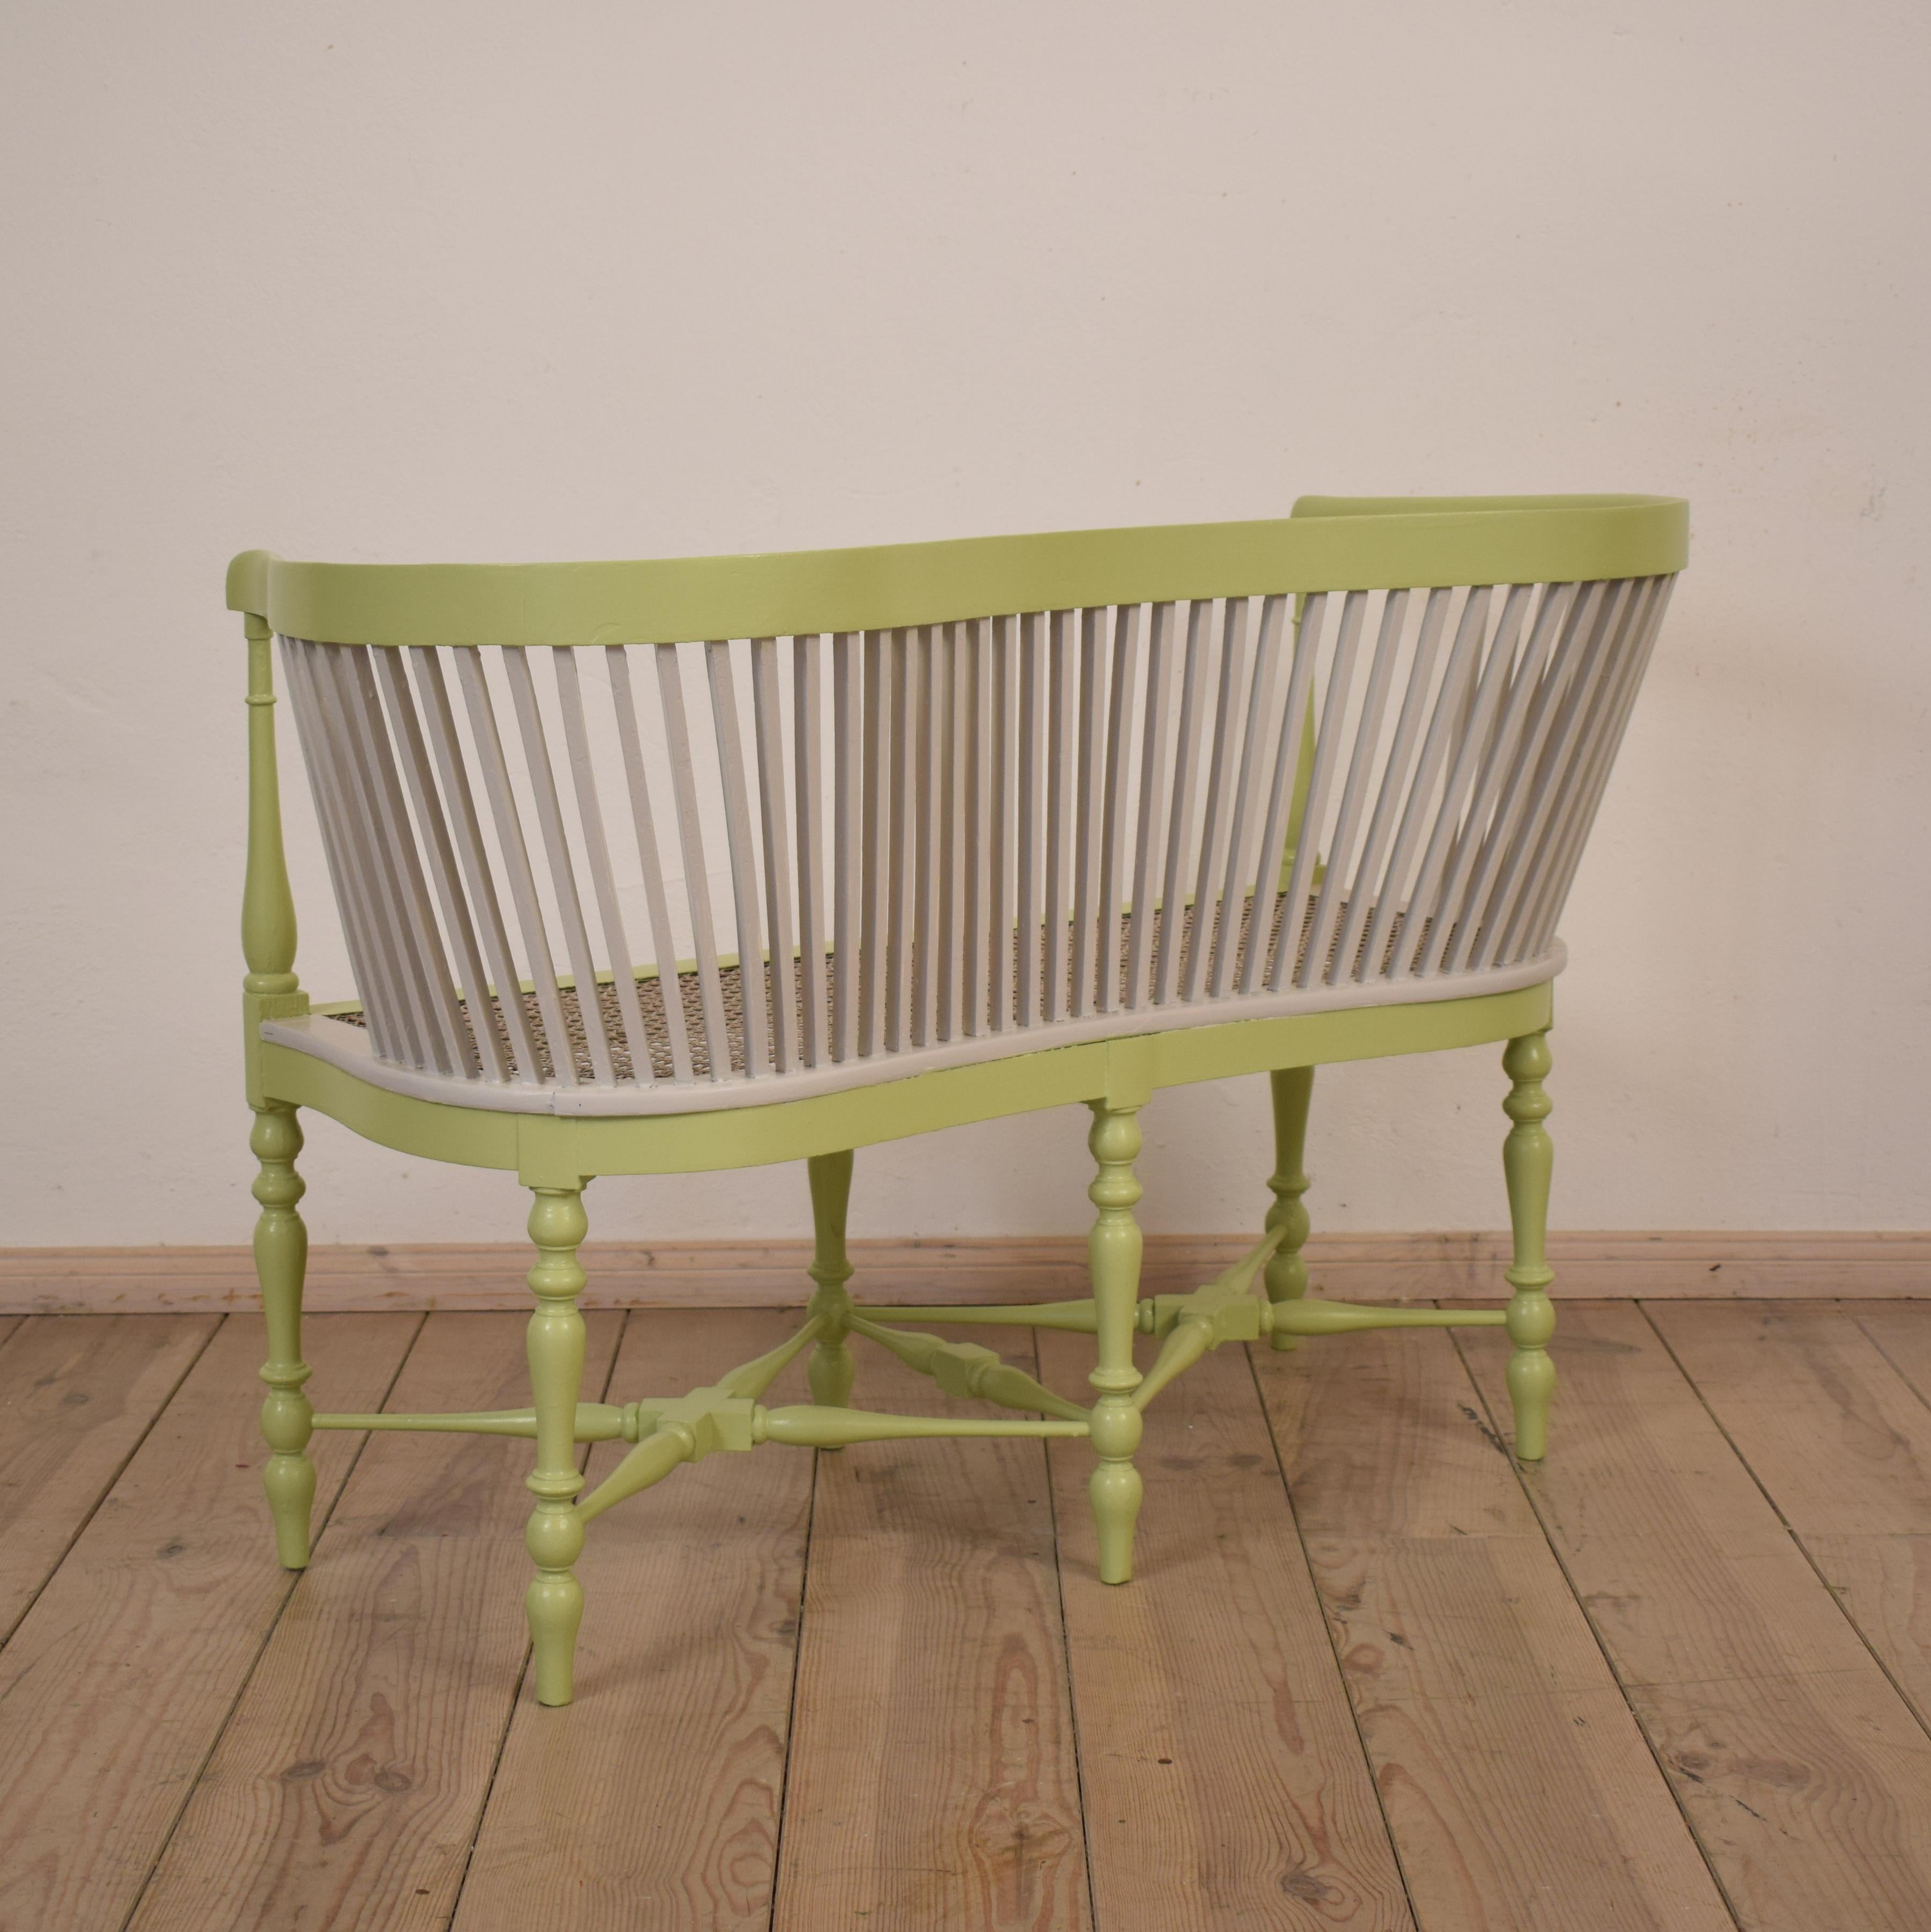 Late 19th Century French Louis XVI Painted and Caned Small Bench im Zustand „Gut“ in Berlin, DE